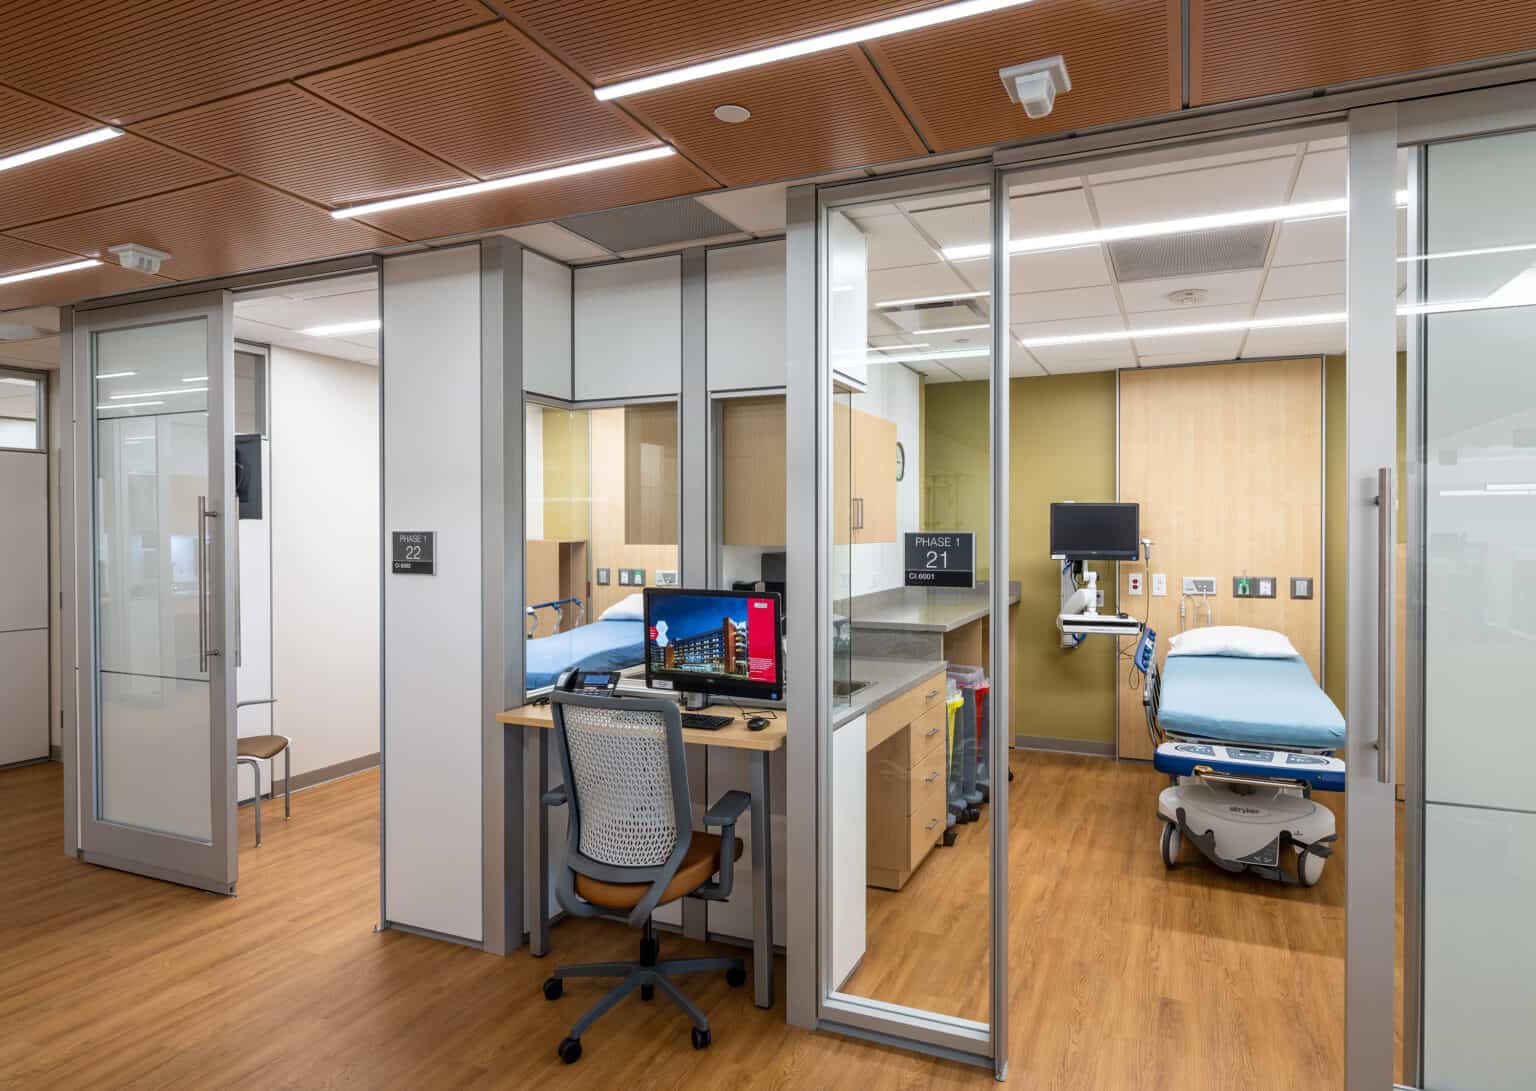 StateoftheArt Infusion Center Opens at UAMS Winthrop P. Rockefeller